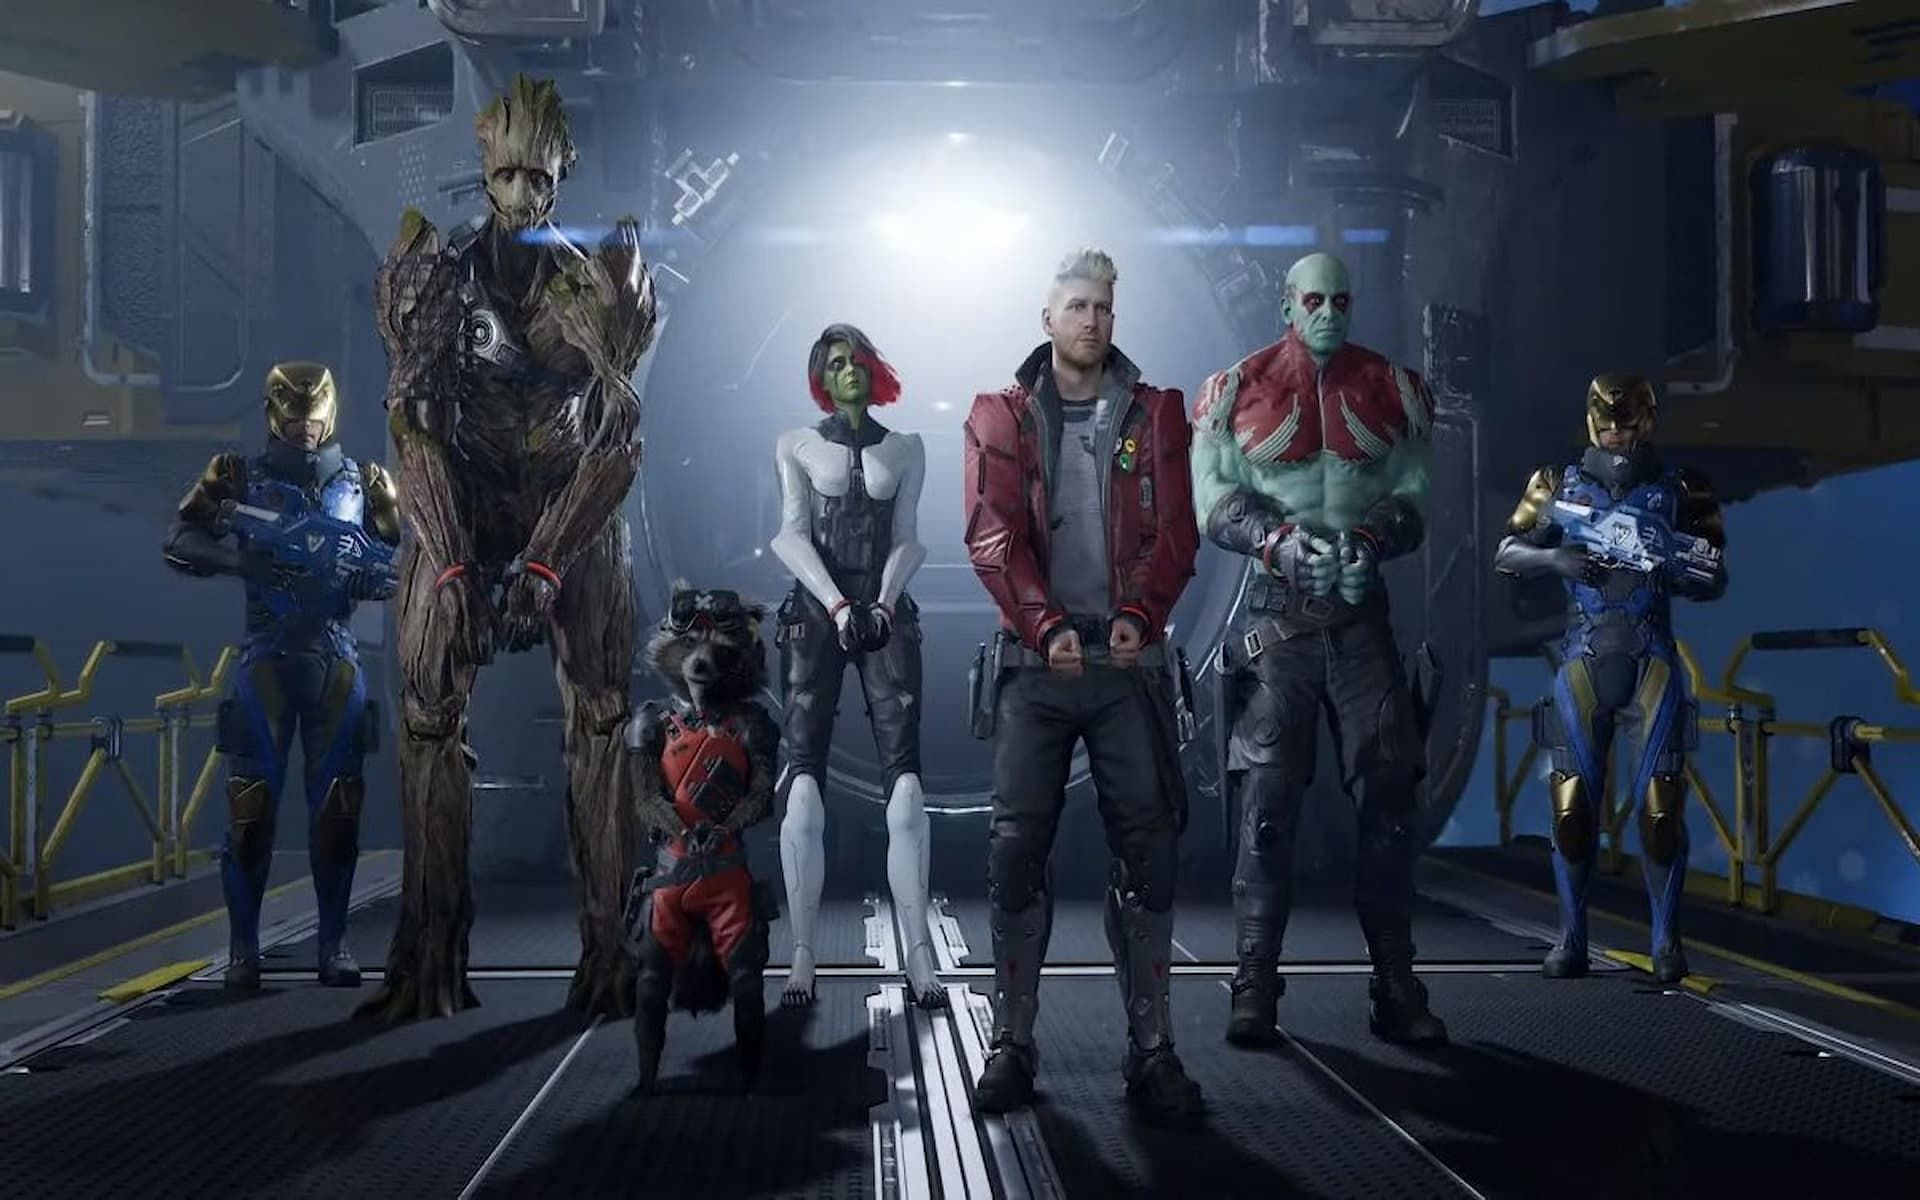 The Guardians of the Galaxy getting arrested. (Image via Square Enix)